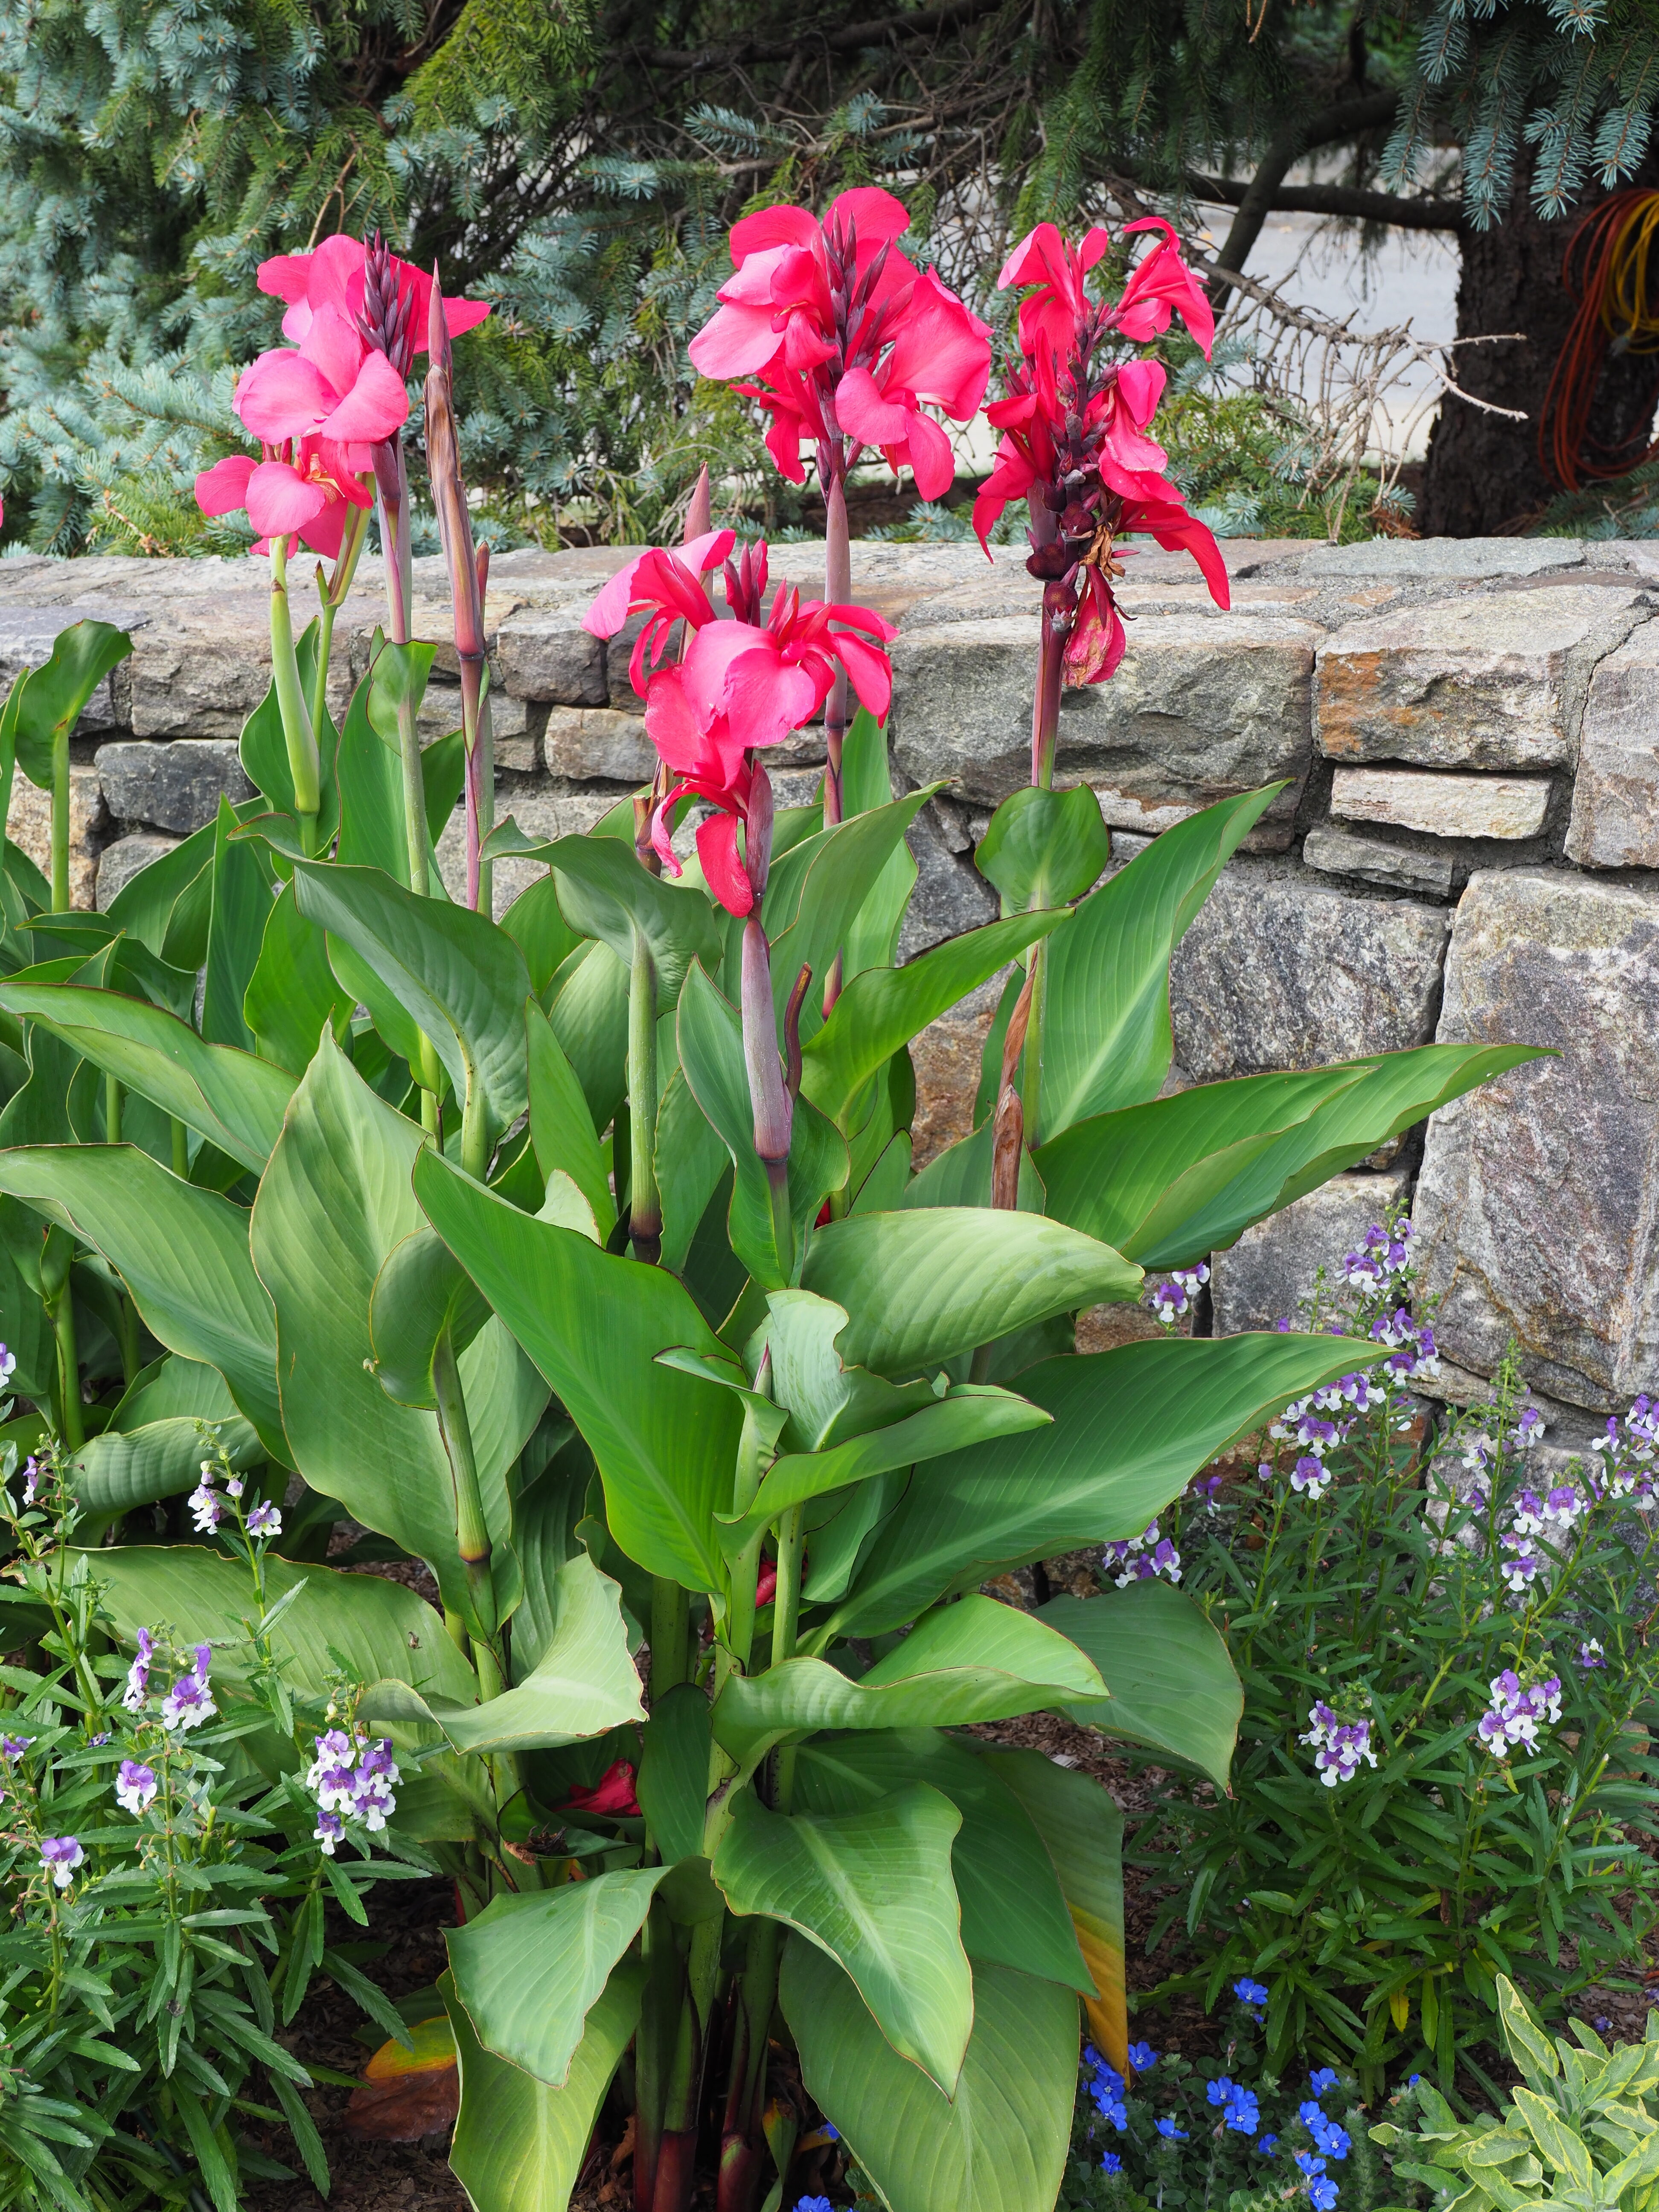 These hot-pink-flowering cannas about 5 feet tall are set in a narrow border backed by a stone wall with taller annuals use to fill in around and under the cannas.